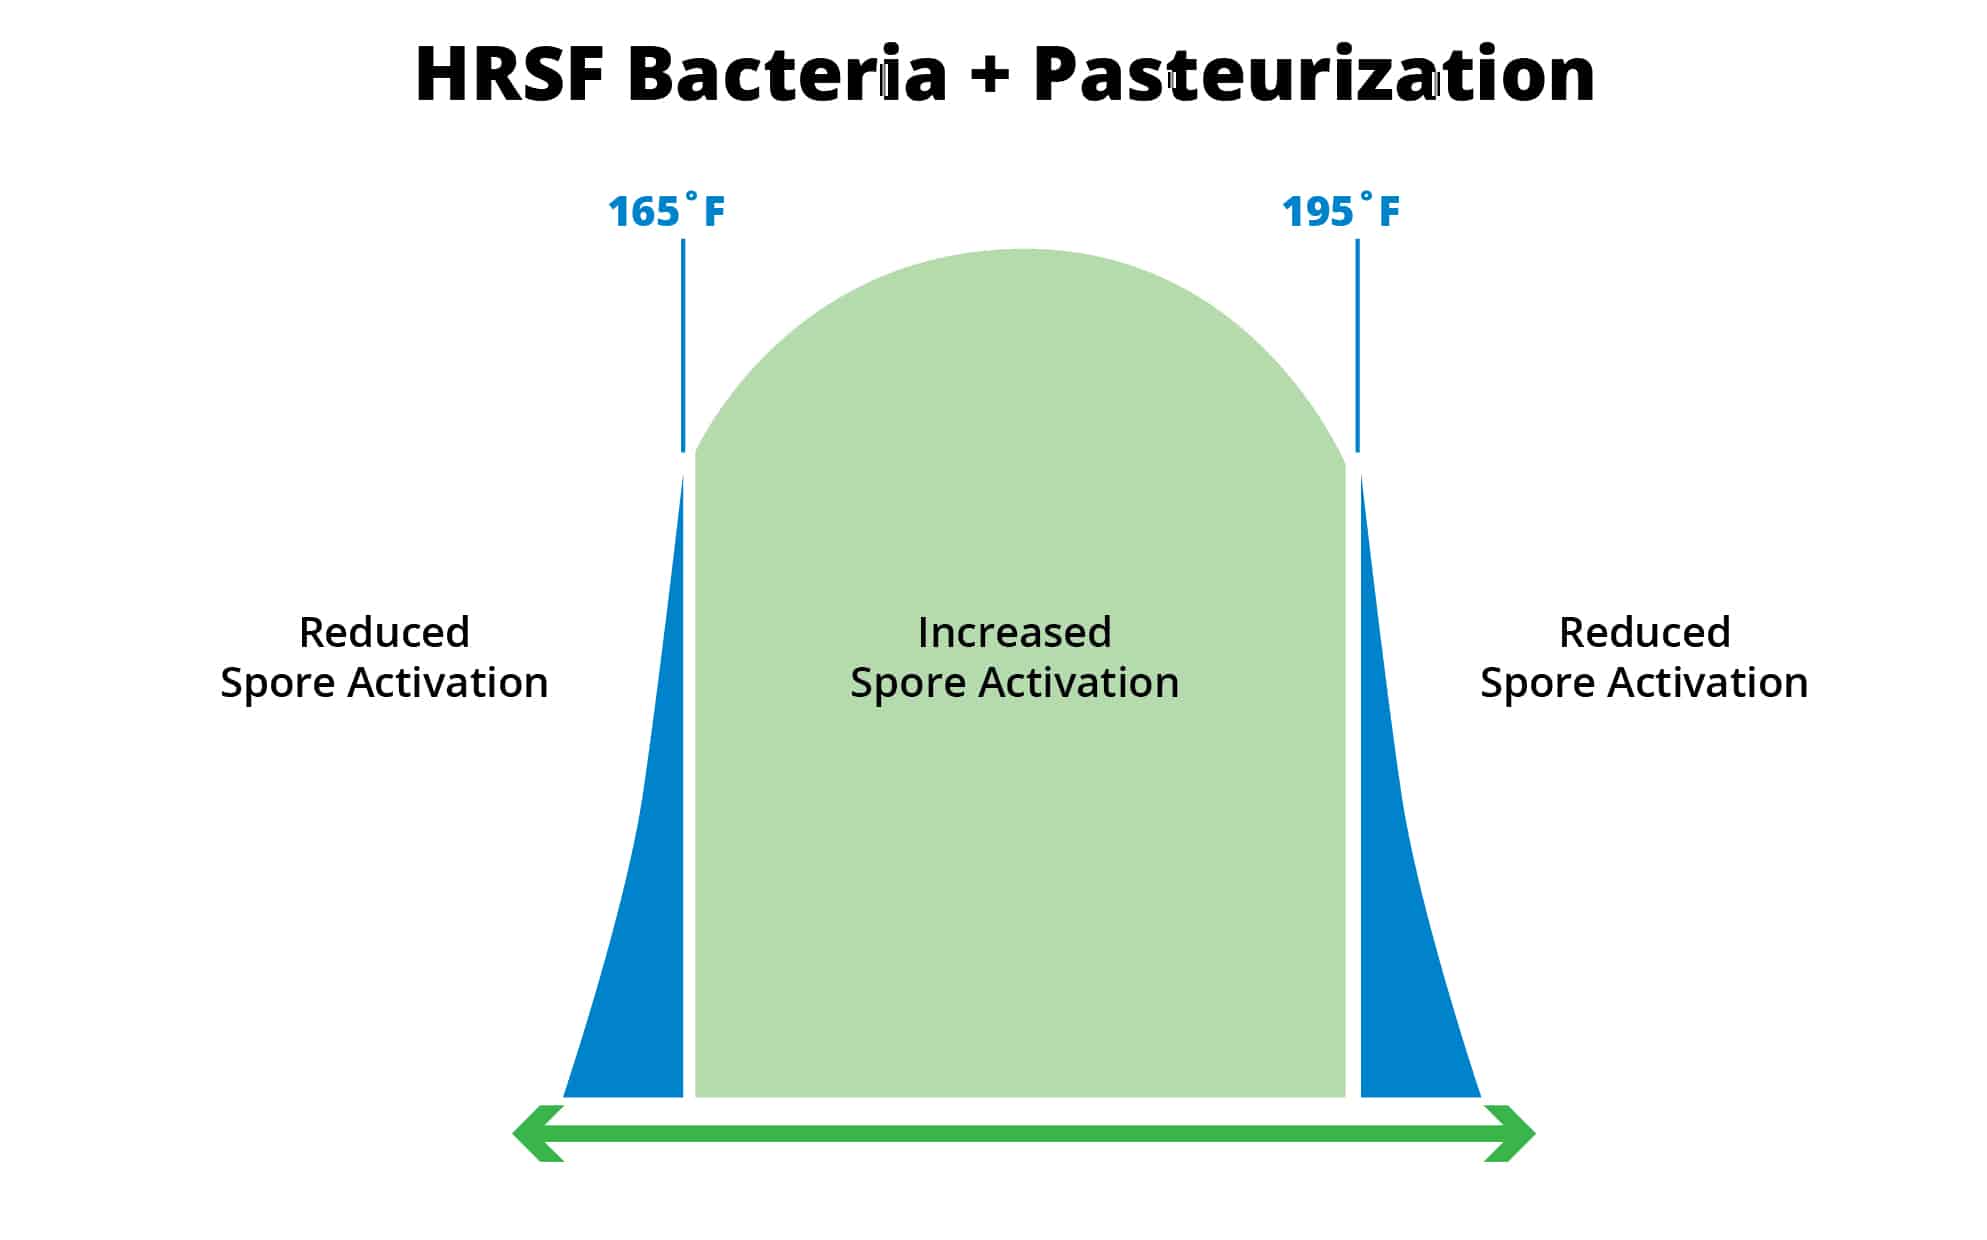 HRSF Bacteria + Pasteurization Bell Curve